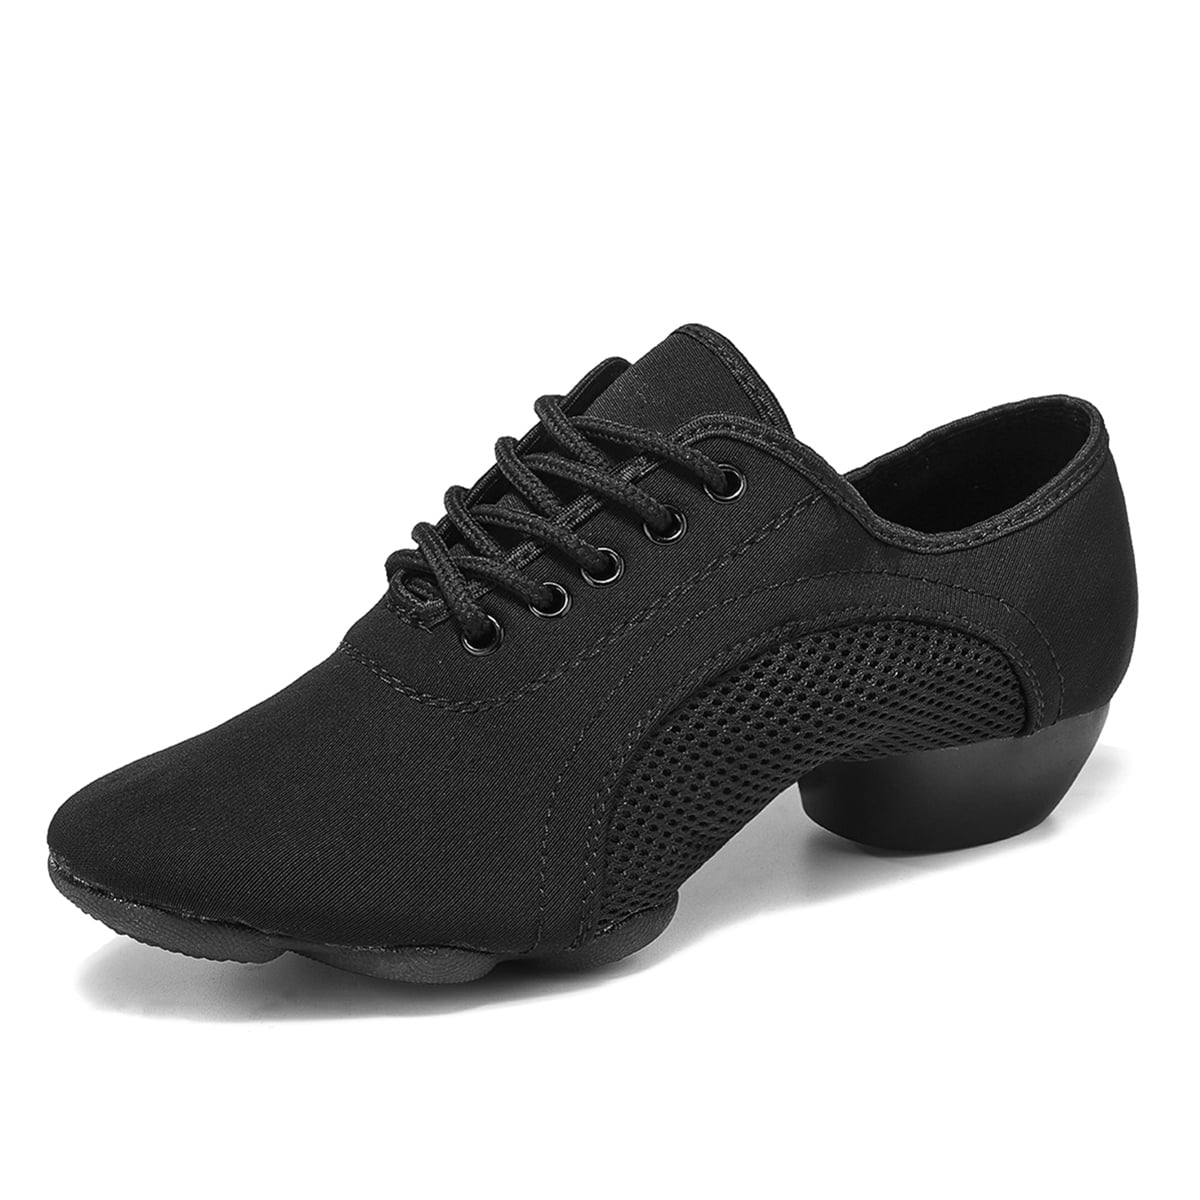 soft sole shoes for adults